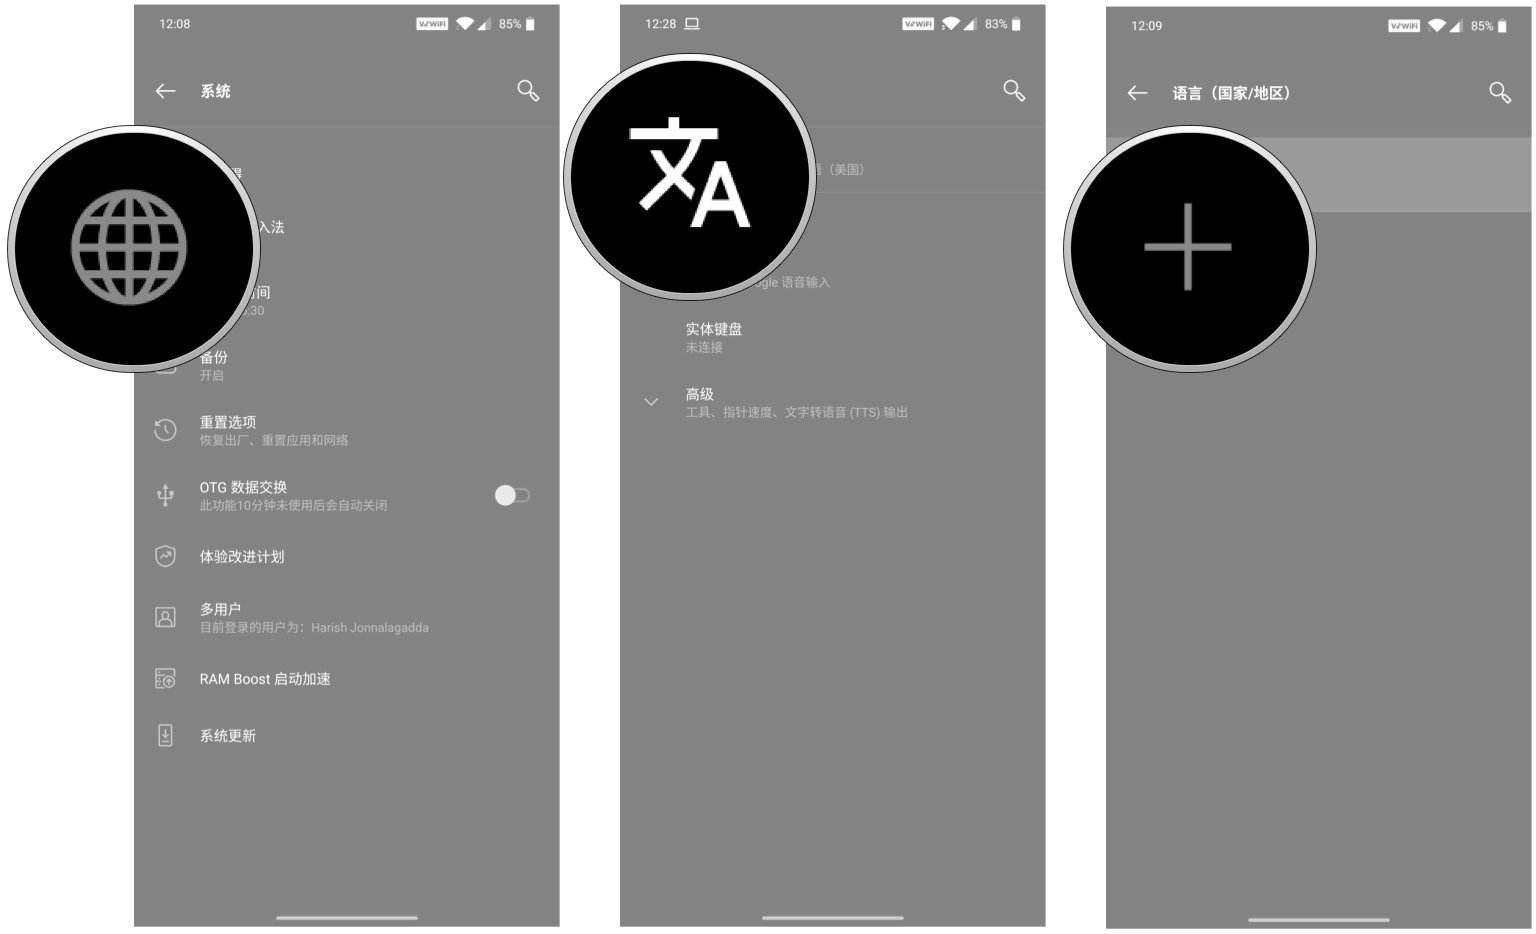 How to change the system language on your Android phone